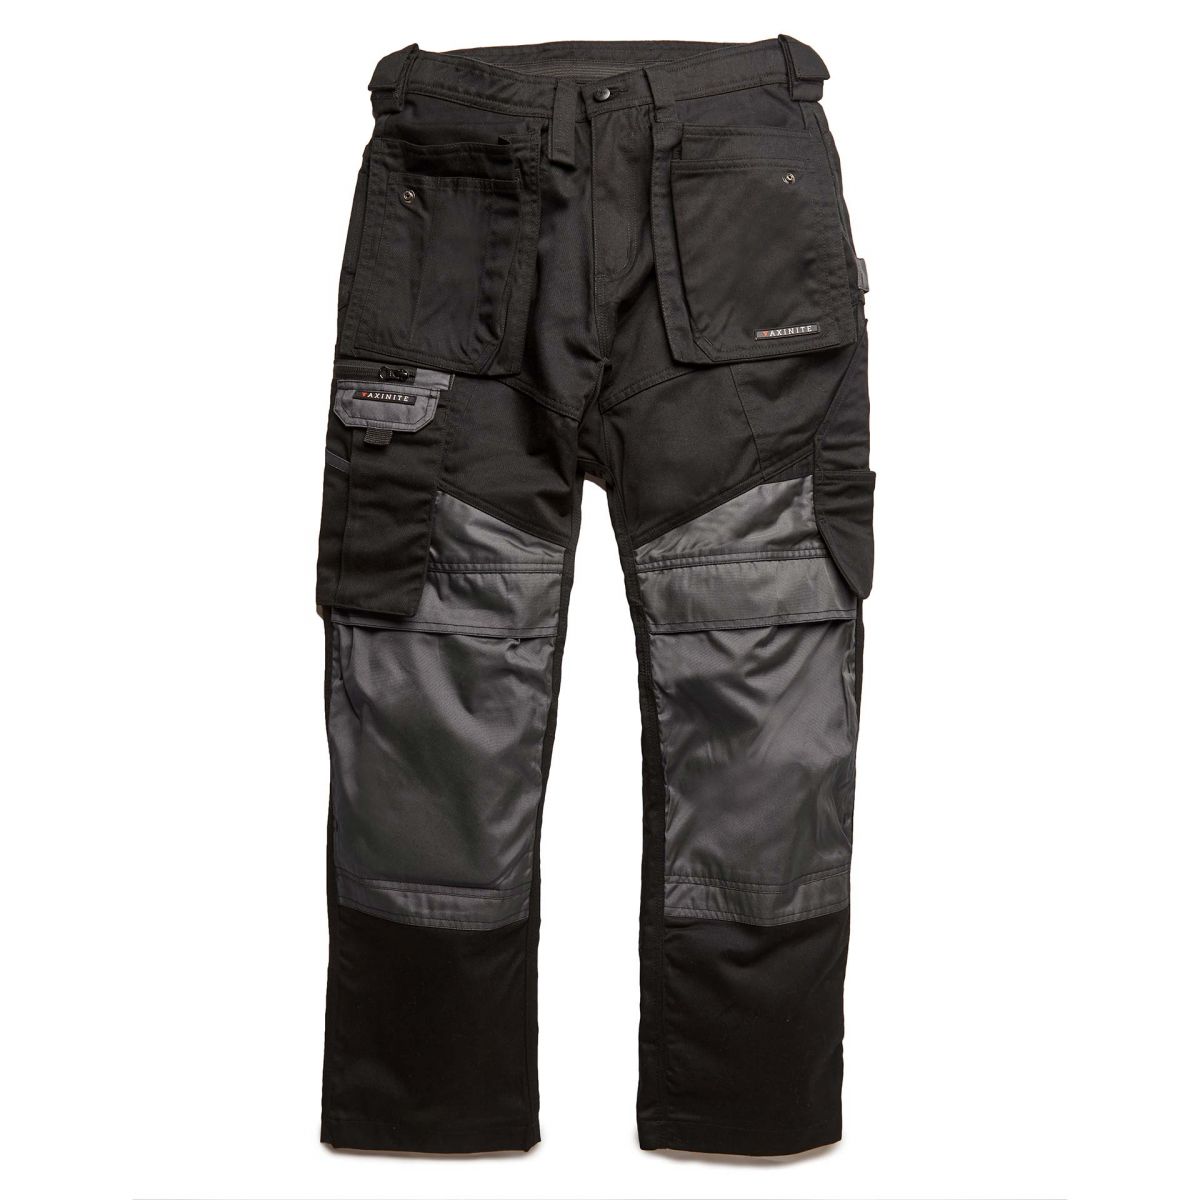 View Axinite AX39 Workwear Trousers Black 34L information